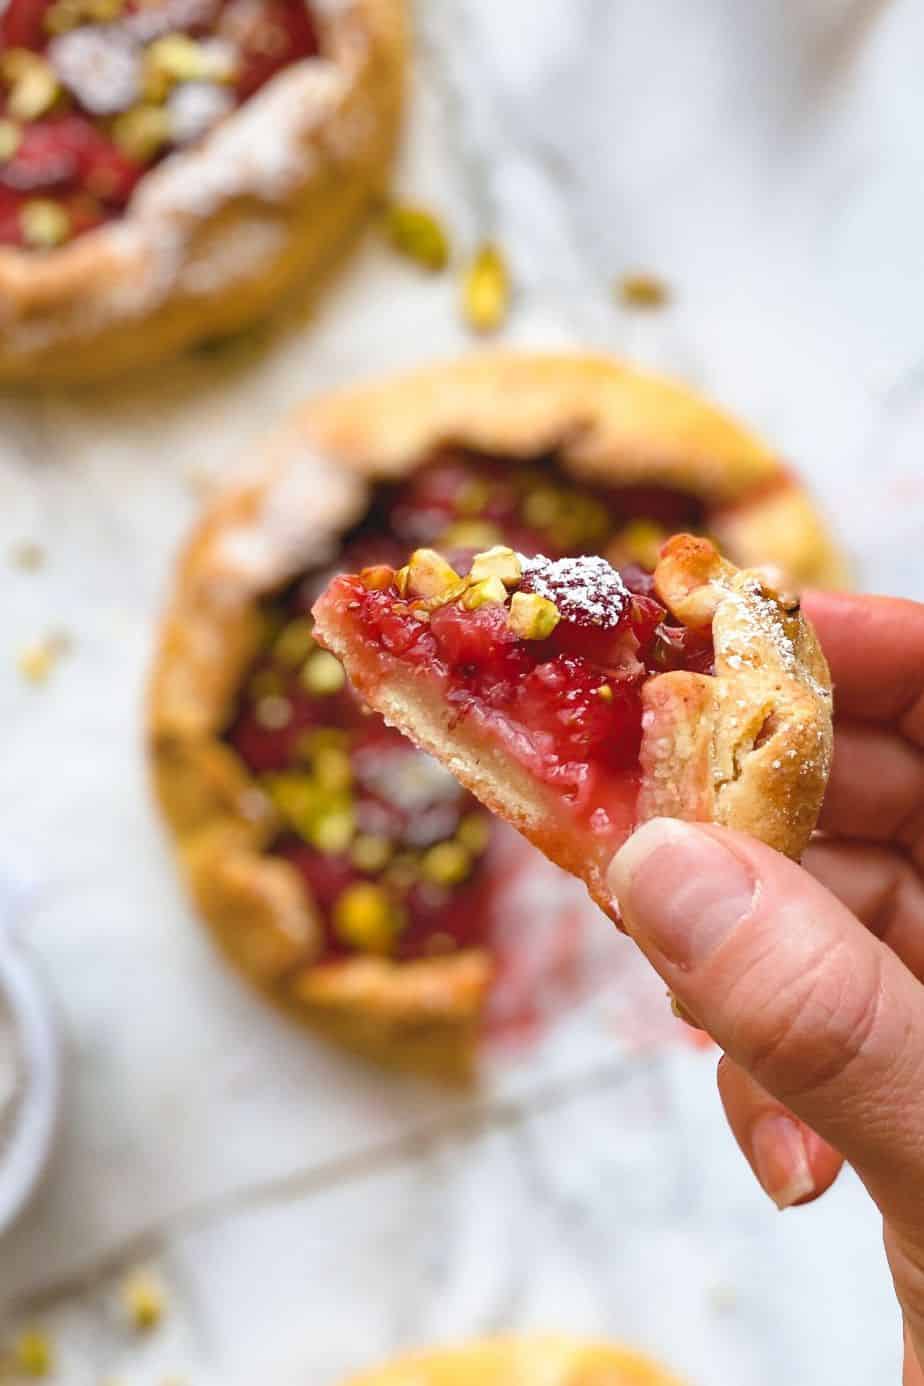 Strawberry pistachio galettes - The easiest and most delicious strawberry dessert recipe. These min yummy strawberry pies are made with cottage cheese, fresh strawberries and topped with crushed pistachios. Simply the best and easiest homemade mini pie recipe that no one cant resist. - The Yummy Bowl